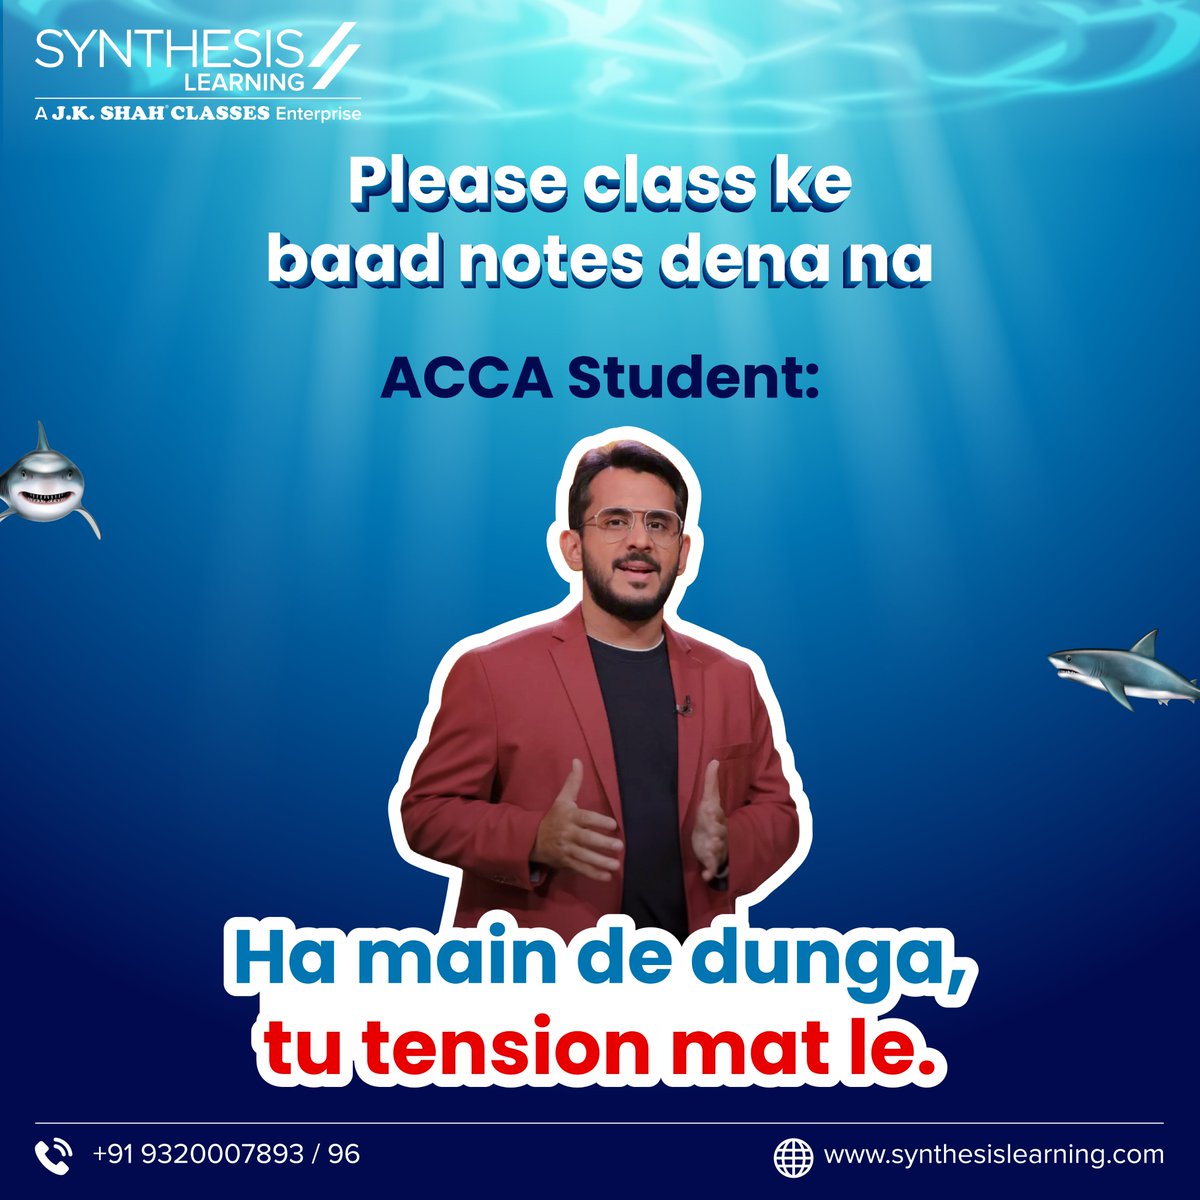 Witness the life of ACCA students ft. Shark Tank 🦈 

#ACCA #ThinkAhead #ACCAGlobal #ACCAIndia #DiscoverACCA #Global #Career #CareerPlanning #Education #Study #Timeline #GlobalQualification #SynthesisLearing #RaiseTheBar #FutureProfessionals #Finance

(2/2)